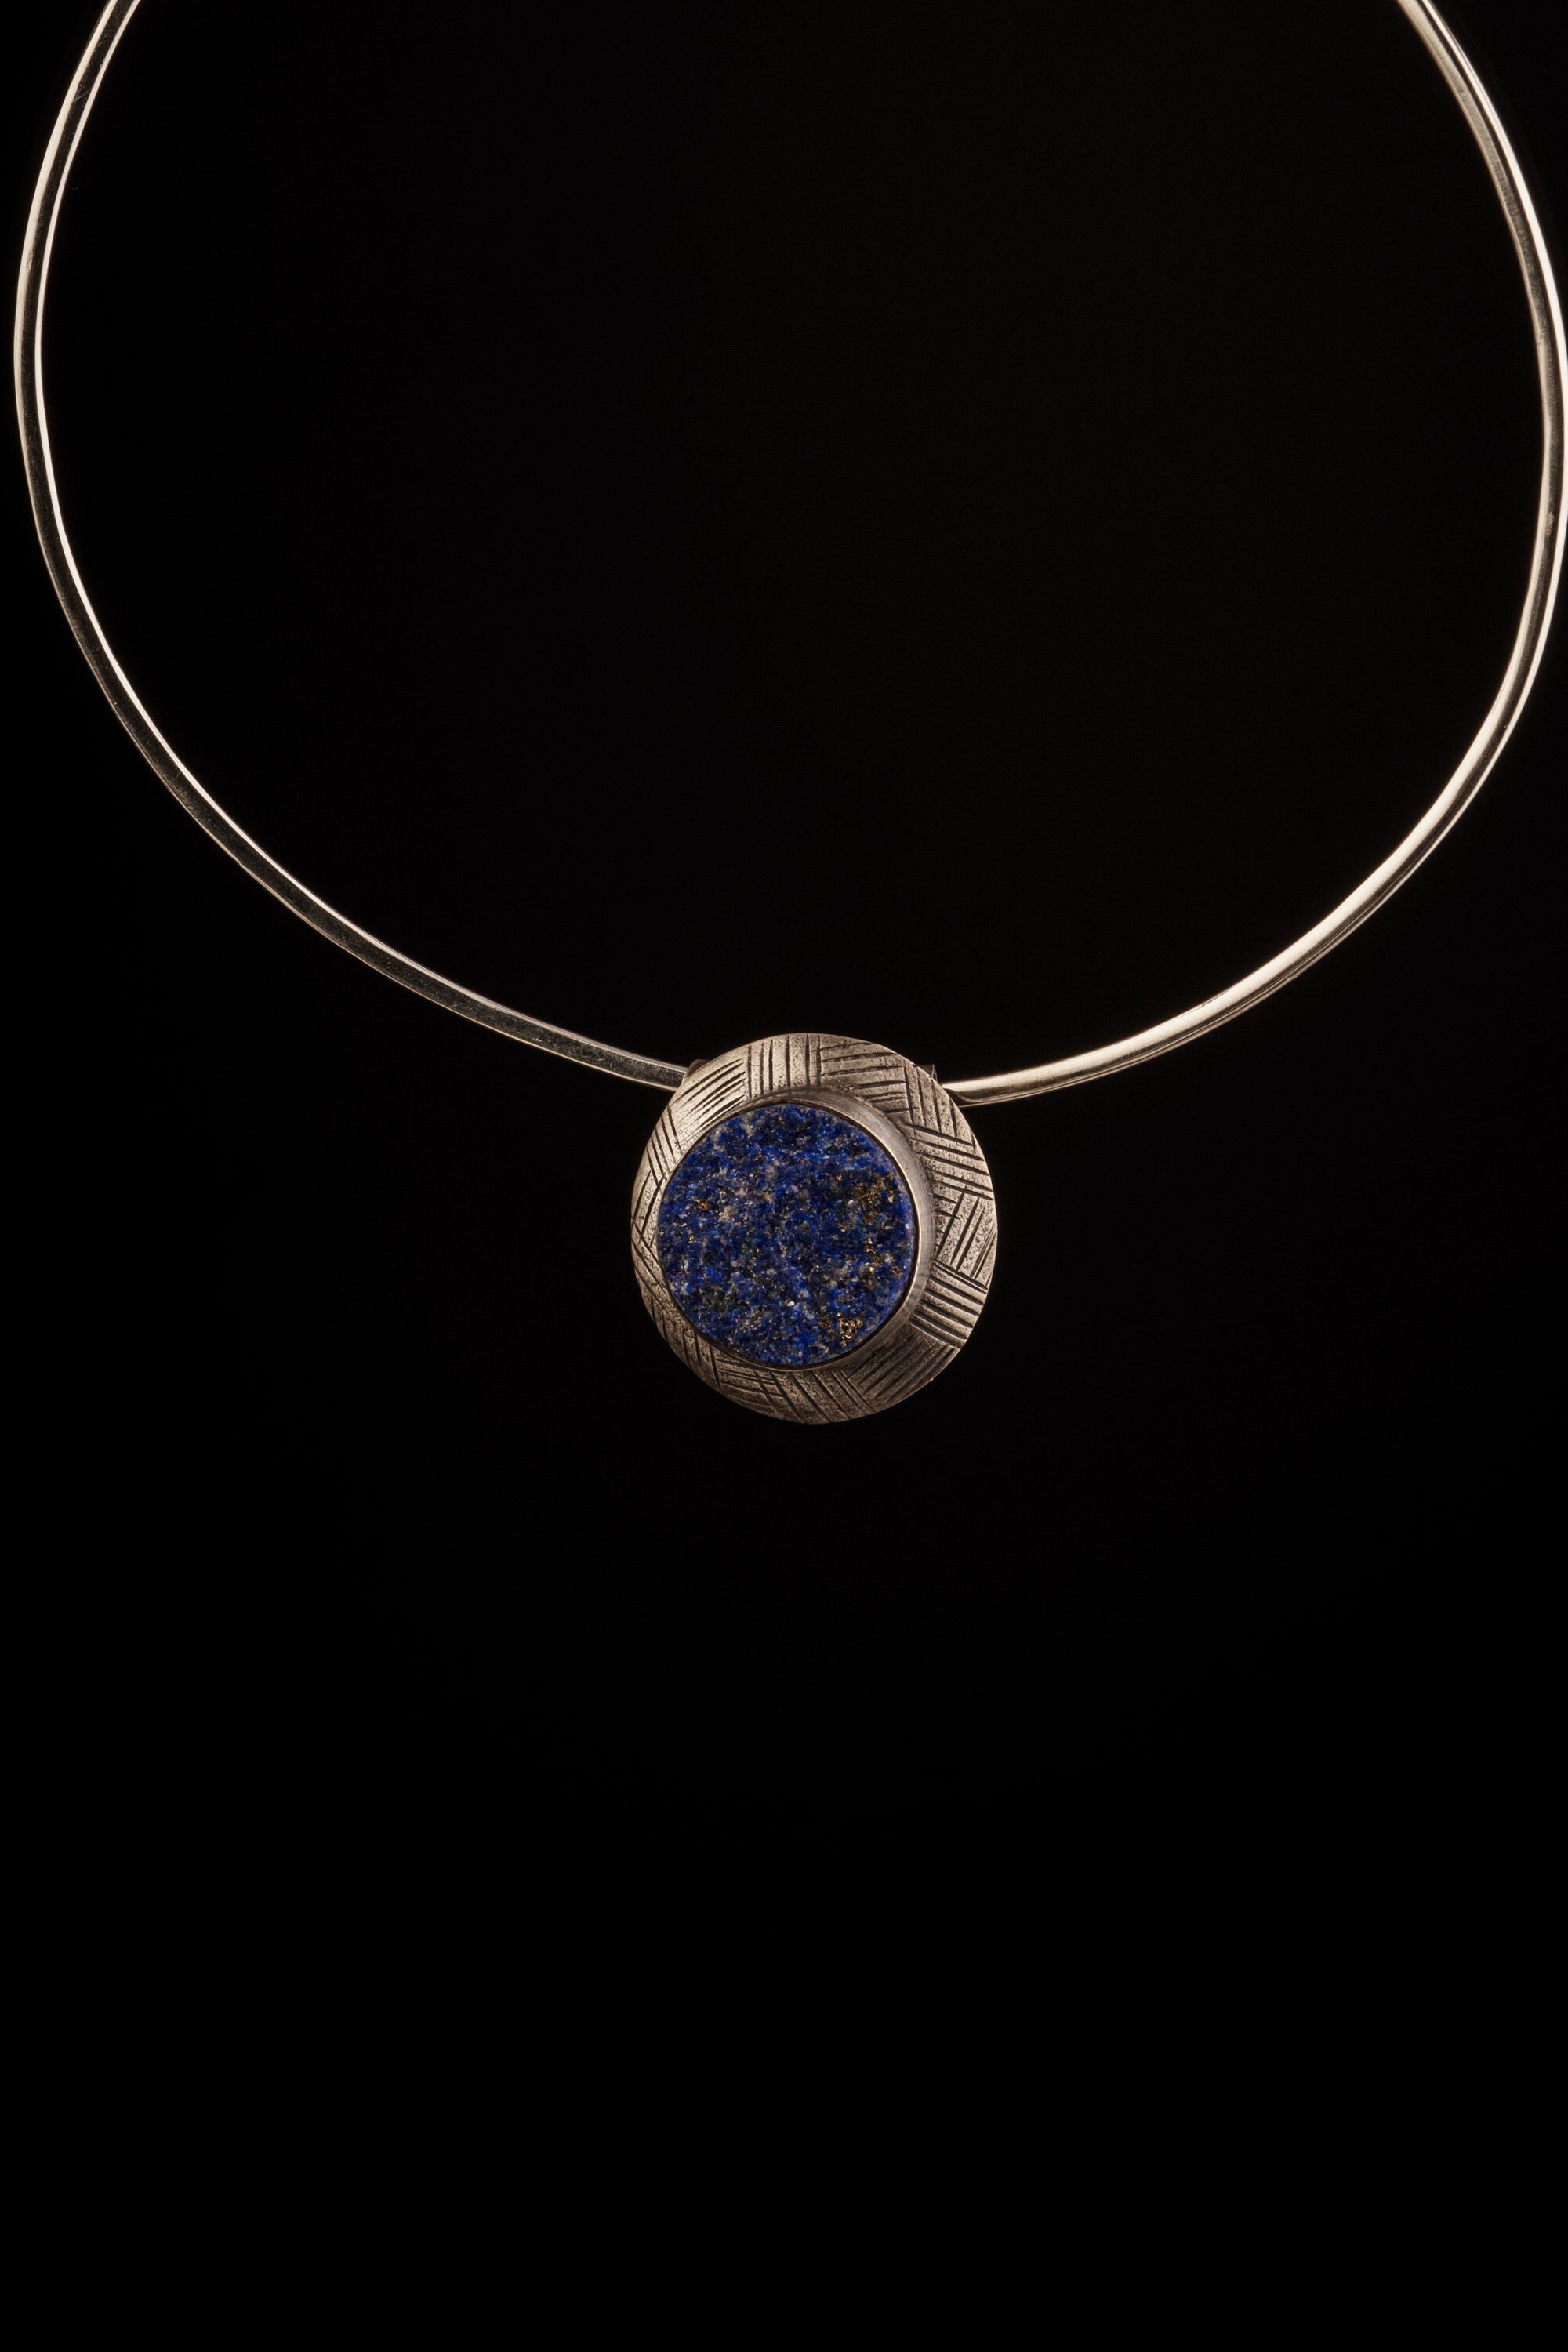 Larger Raw Lapis Lazuli Circle Cab on Crisscrossed Shield - Stack Pendant textured & oxidised - 925 sterling silver - Crystal Necklace